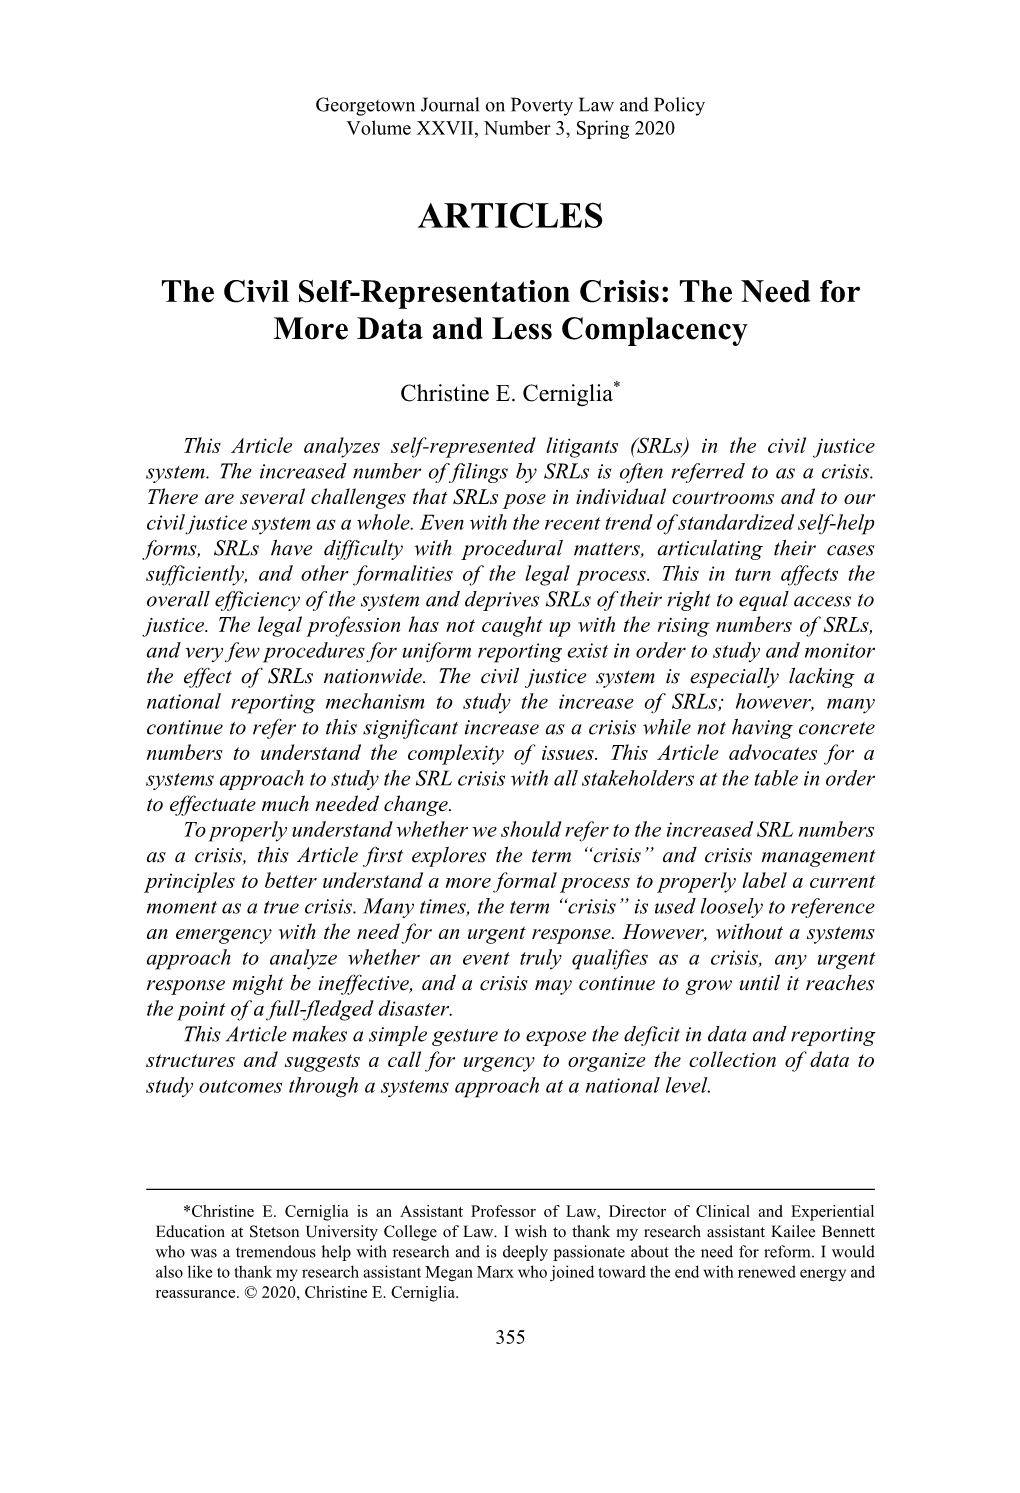 The Civil Self-Representation Crisis: the Need for More Data and Less Complacency